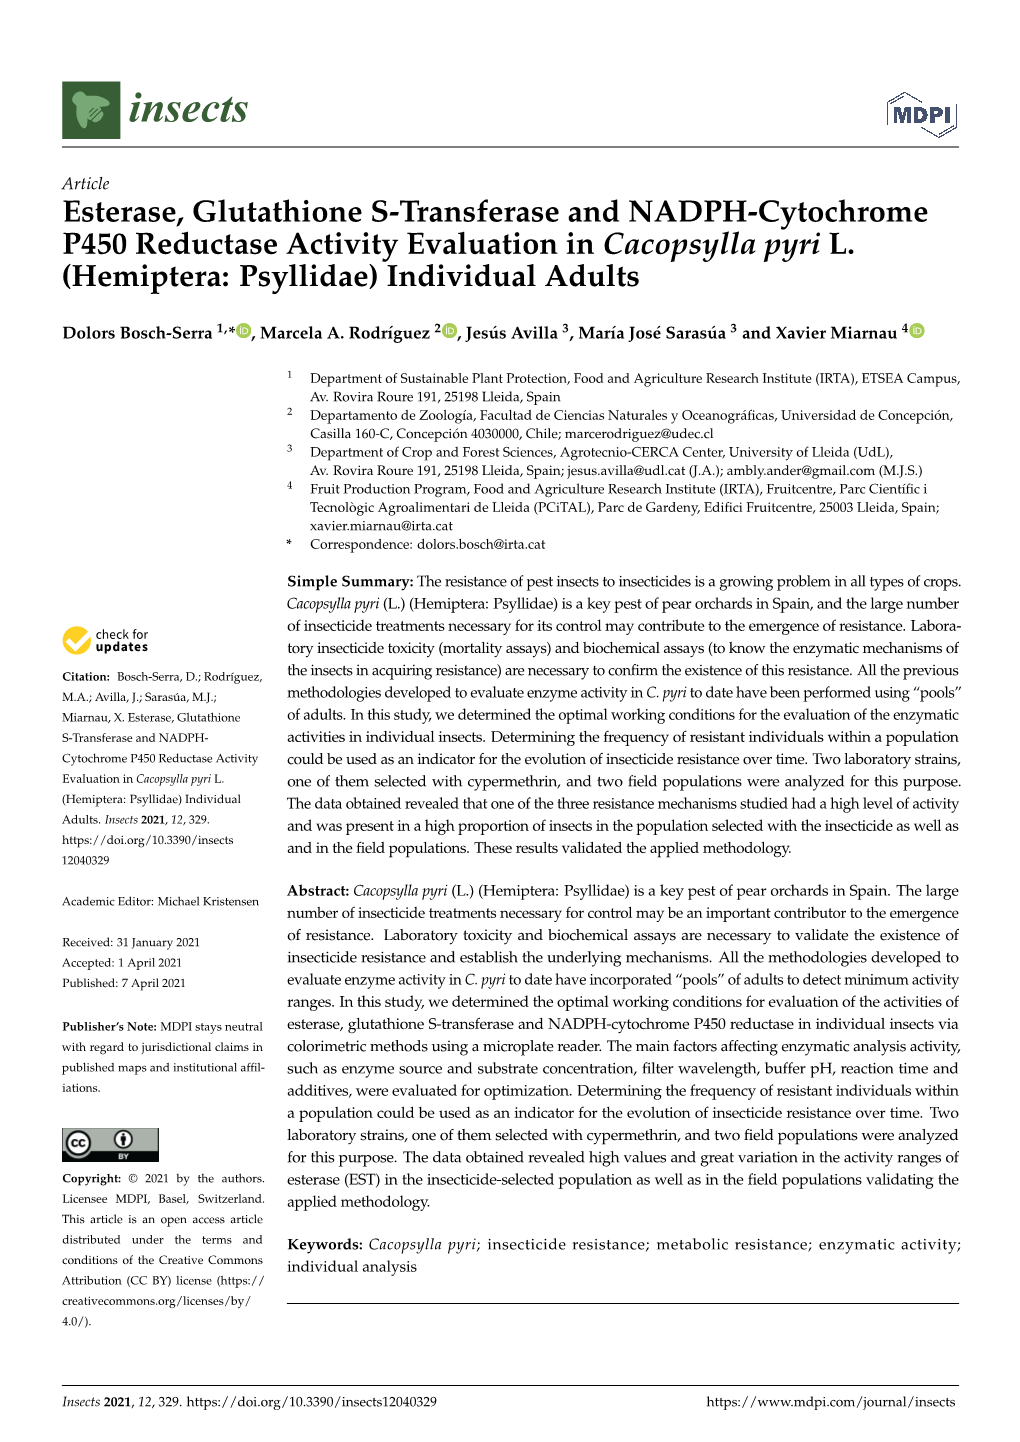 Esterase, Glutathione S-Transferase and NADPH-Cytochrome P450 Reductase Activity Evaluation in Cacopsylla Pyri L